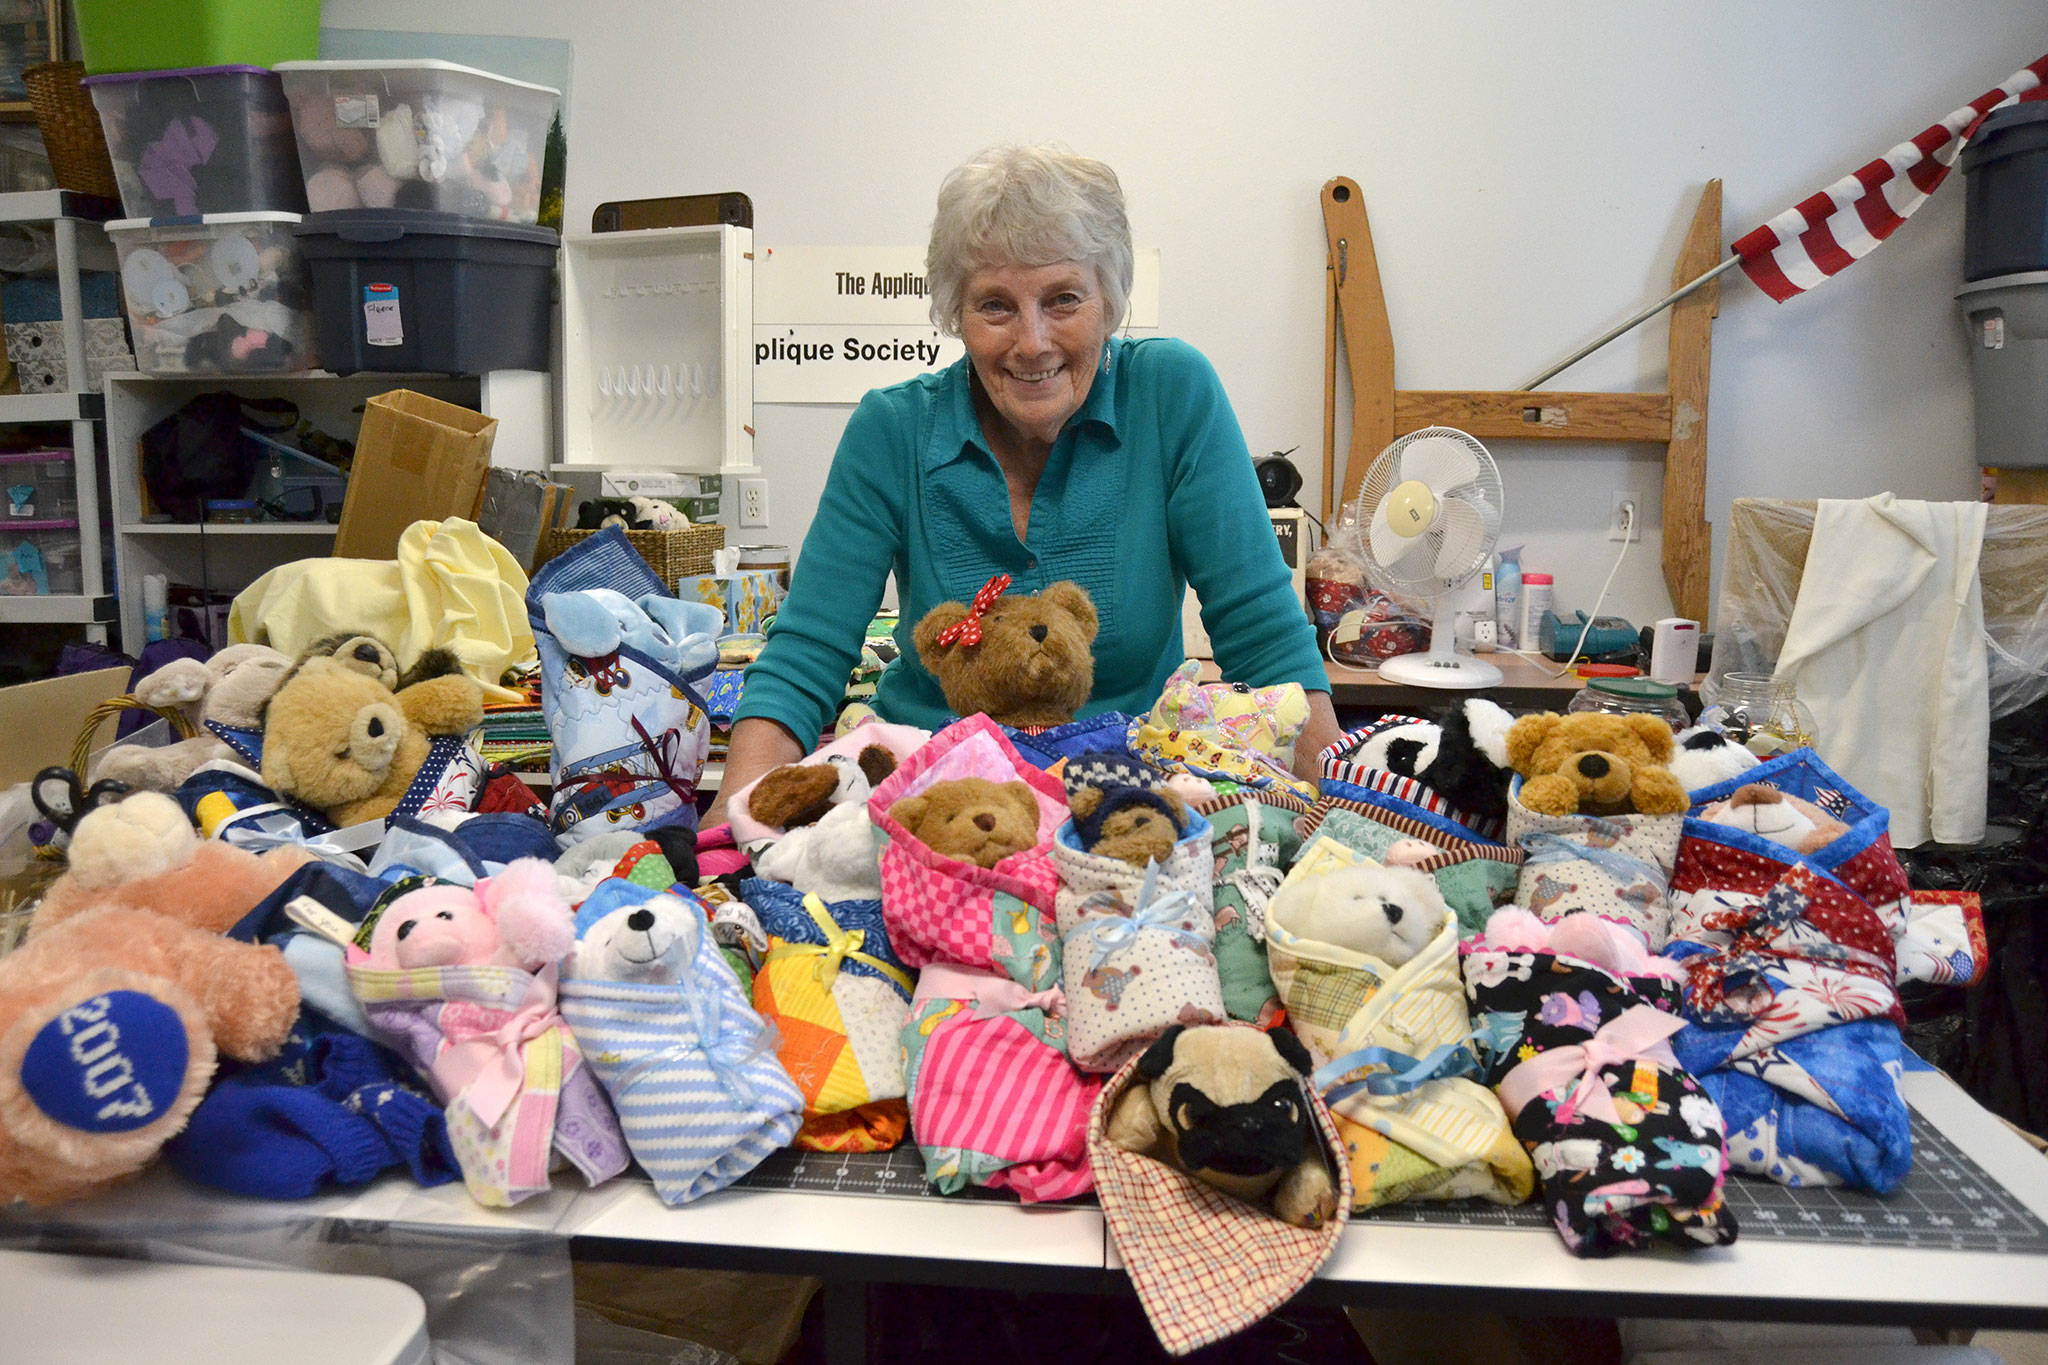 Since 2008, Loretta Bilow has coordinated Joy Quilts featuring stuffed animals wrapped in quilts for first responders and medical professionals to share with children experiencing trauma or unwelcome transition in their lives. She’s helped distribute more than 4,000 Joy Quilts in the area, in Washington and worldwide. Sequim Gazette photo by Matthew Nash